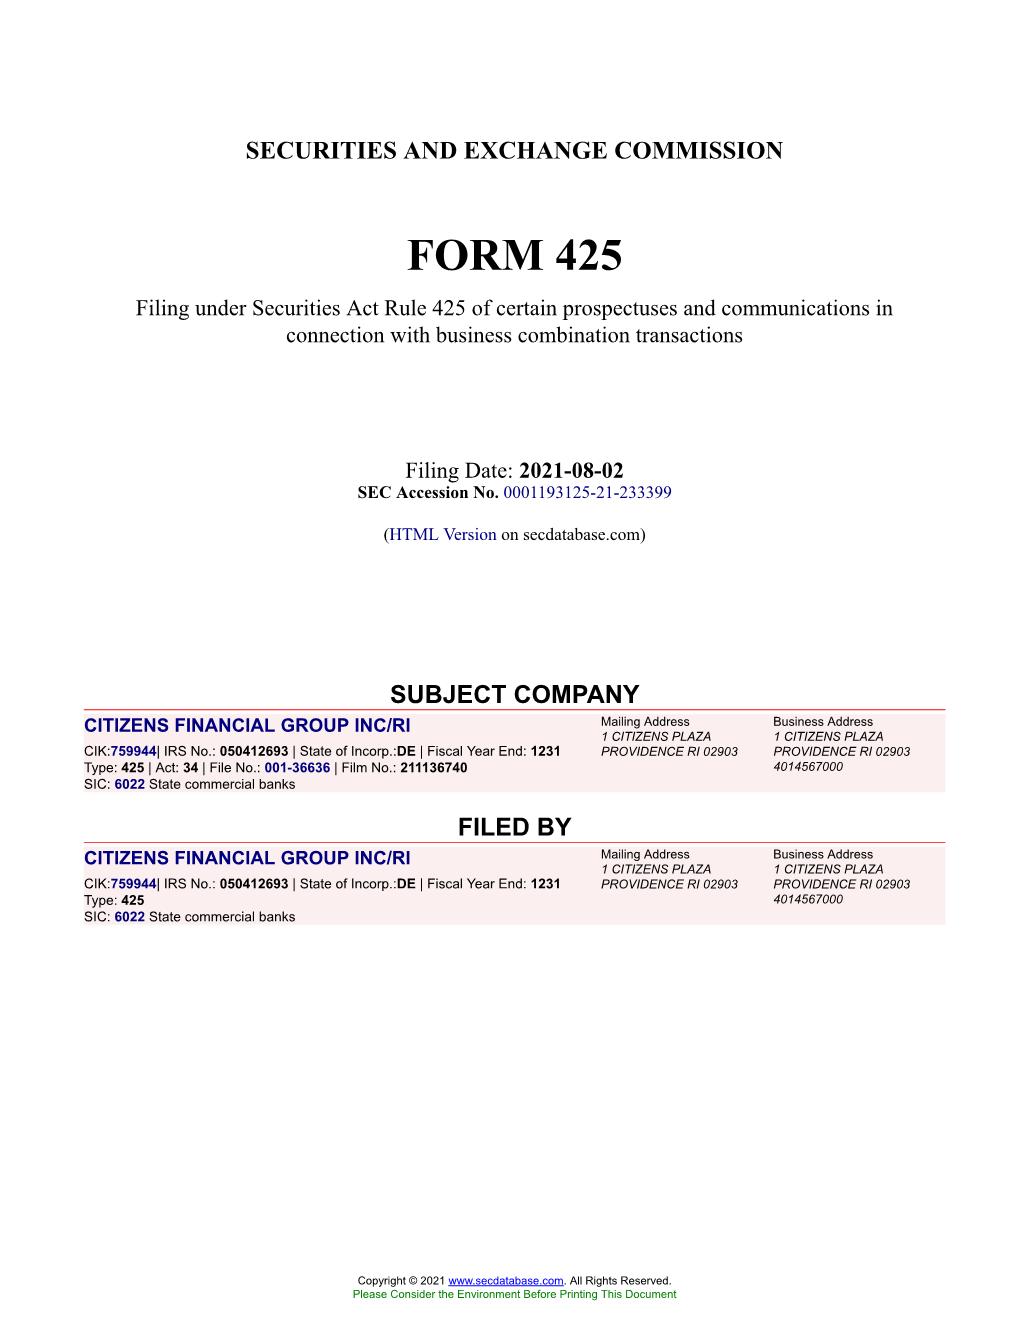 CITIZENS FINANCIAL GROUP INC/RI Form 425 Filed 2021-08-02